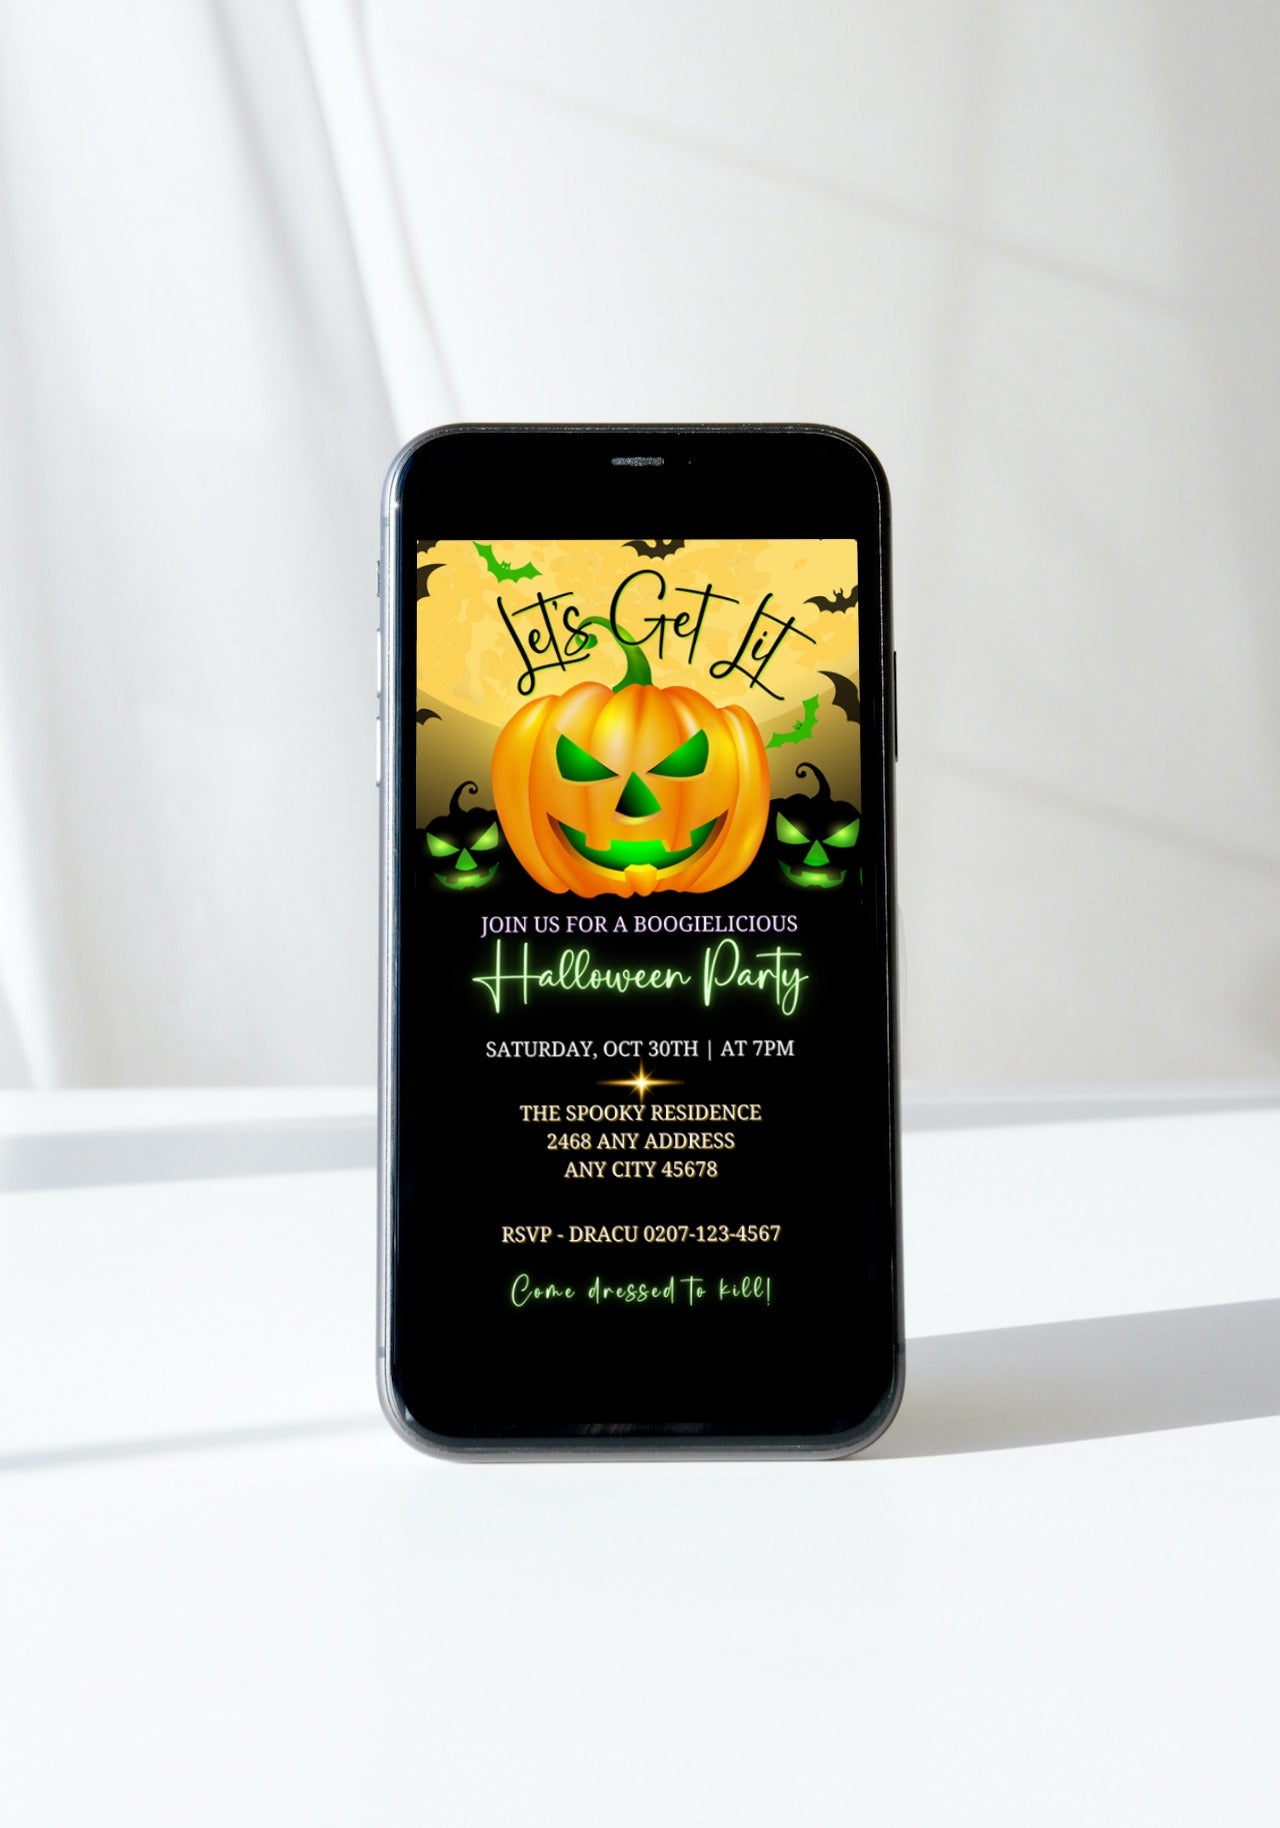 Cell phone showing a Halloween Evite with a green-faced pumpkin and text, emphasizing customizability via Canva for various celebrations.